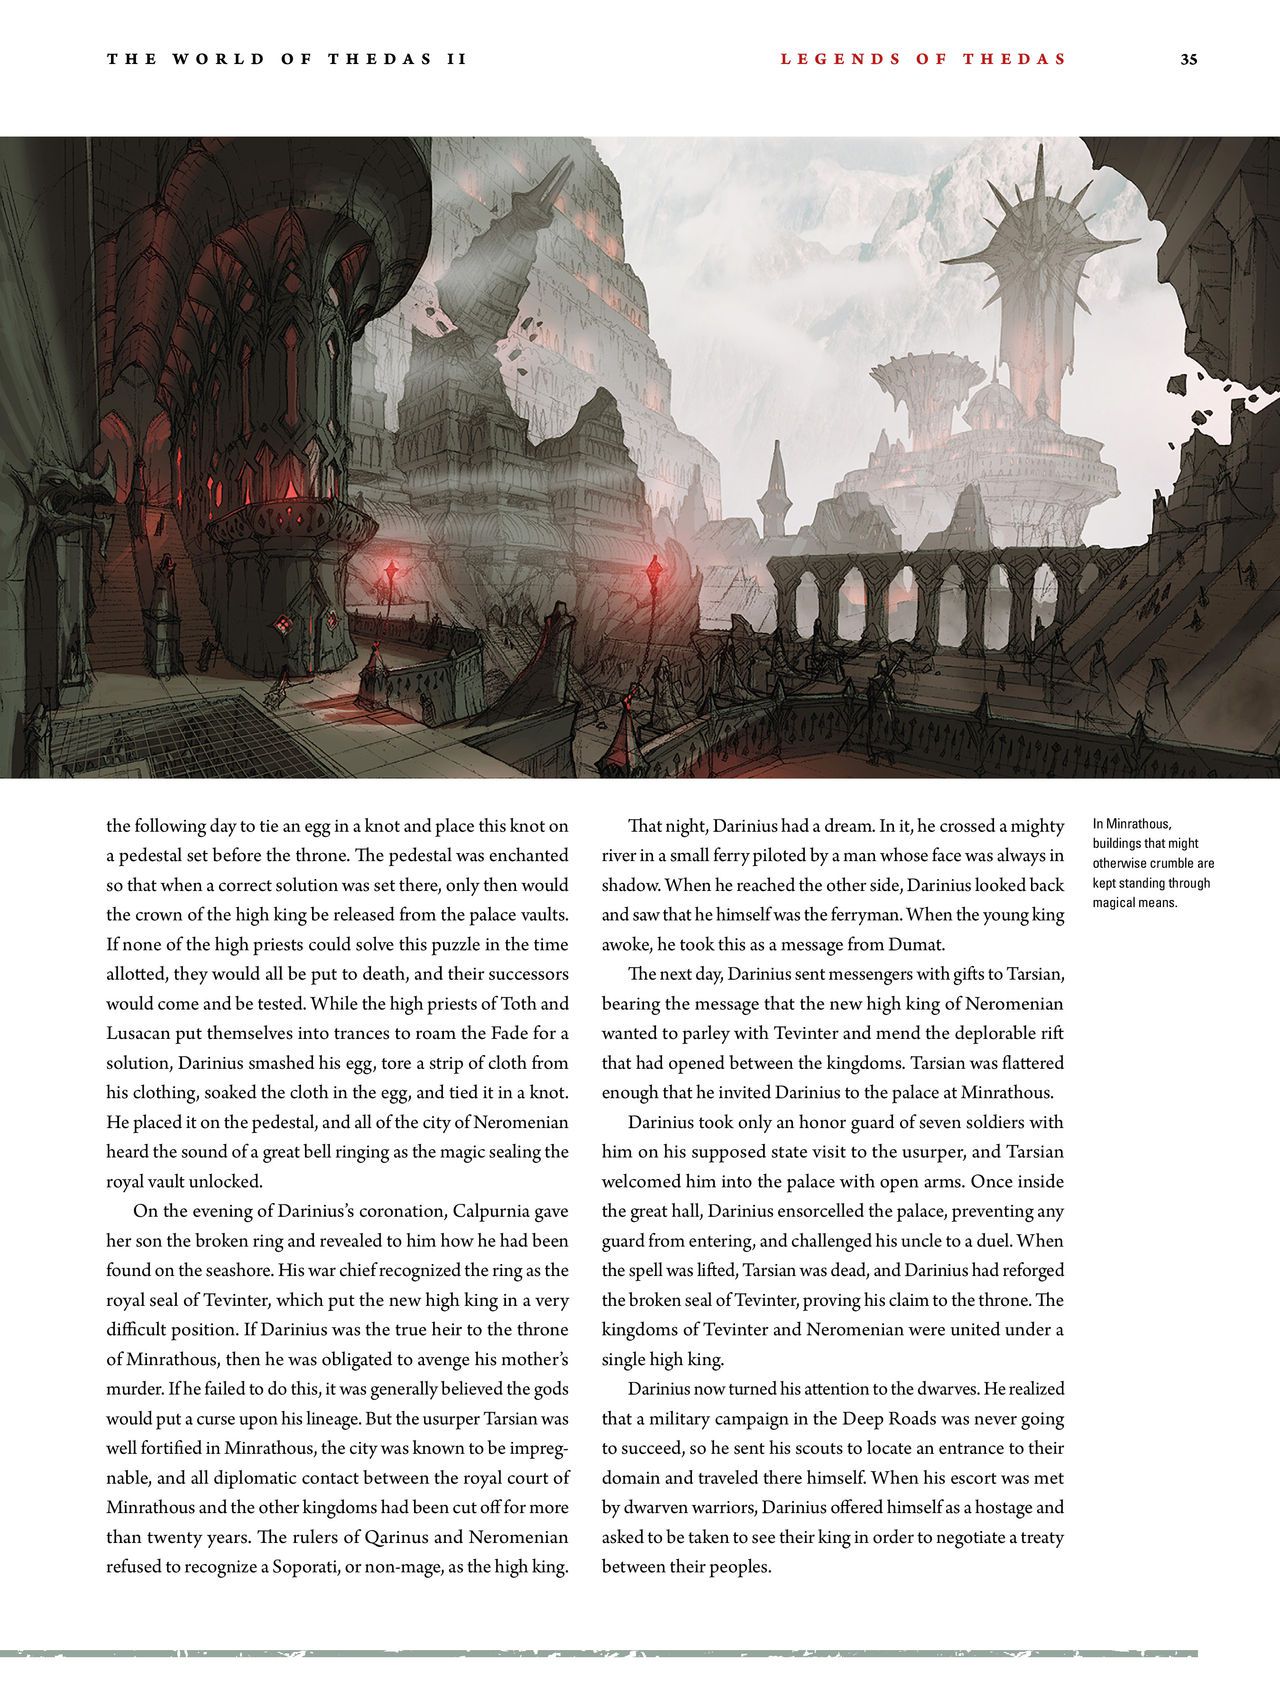 Dragon Age - The World of Thedas v02 32